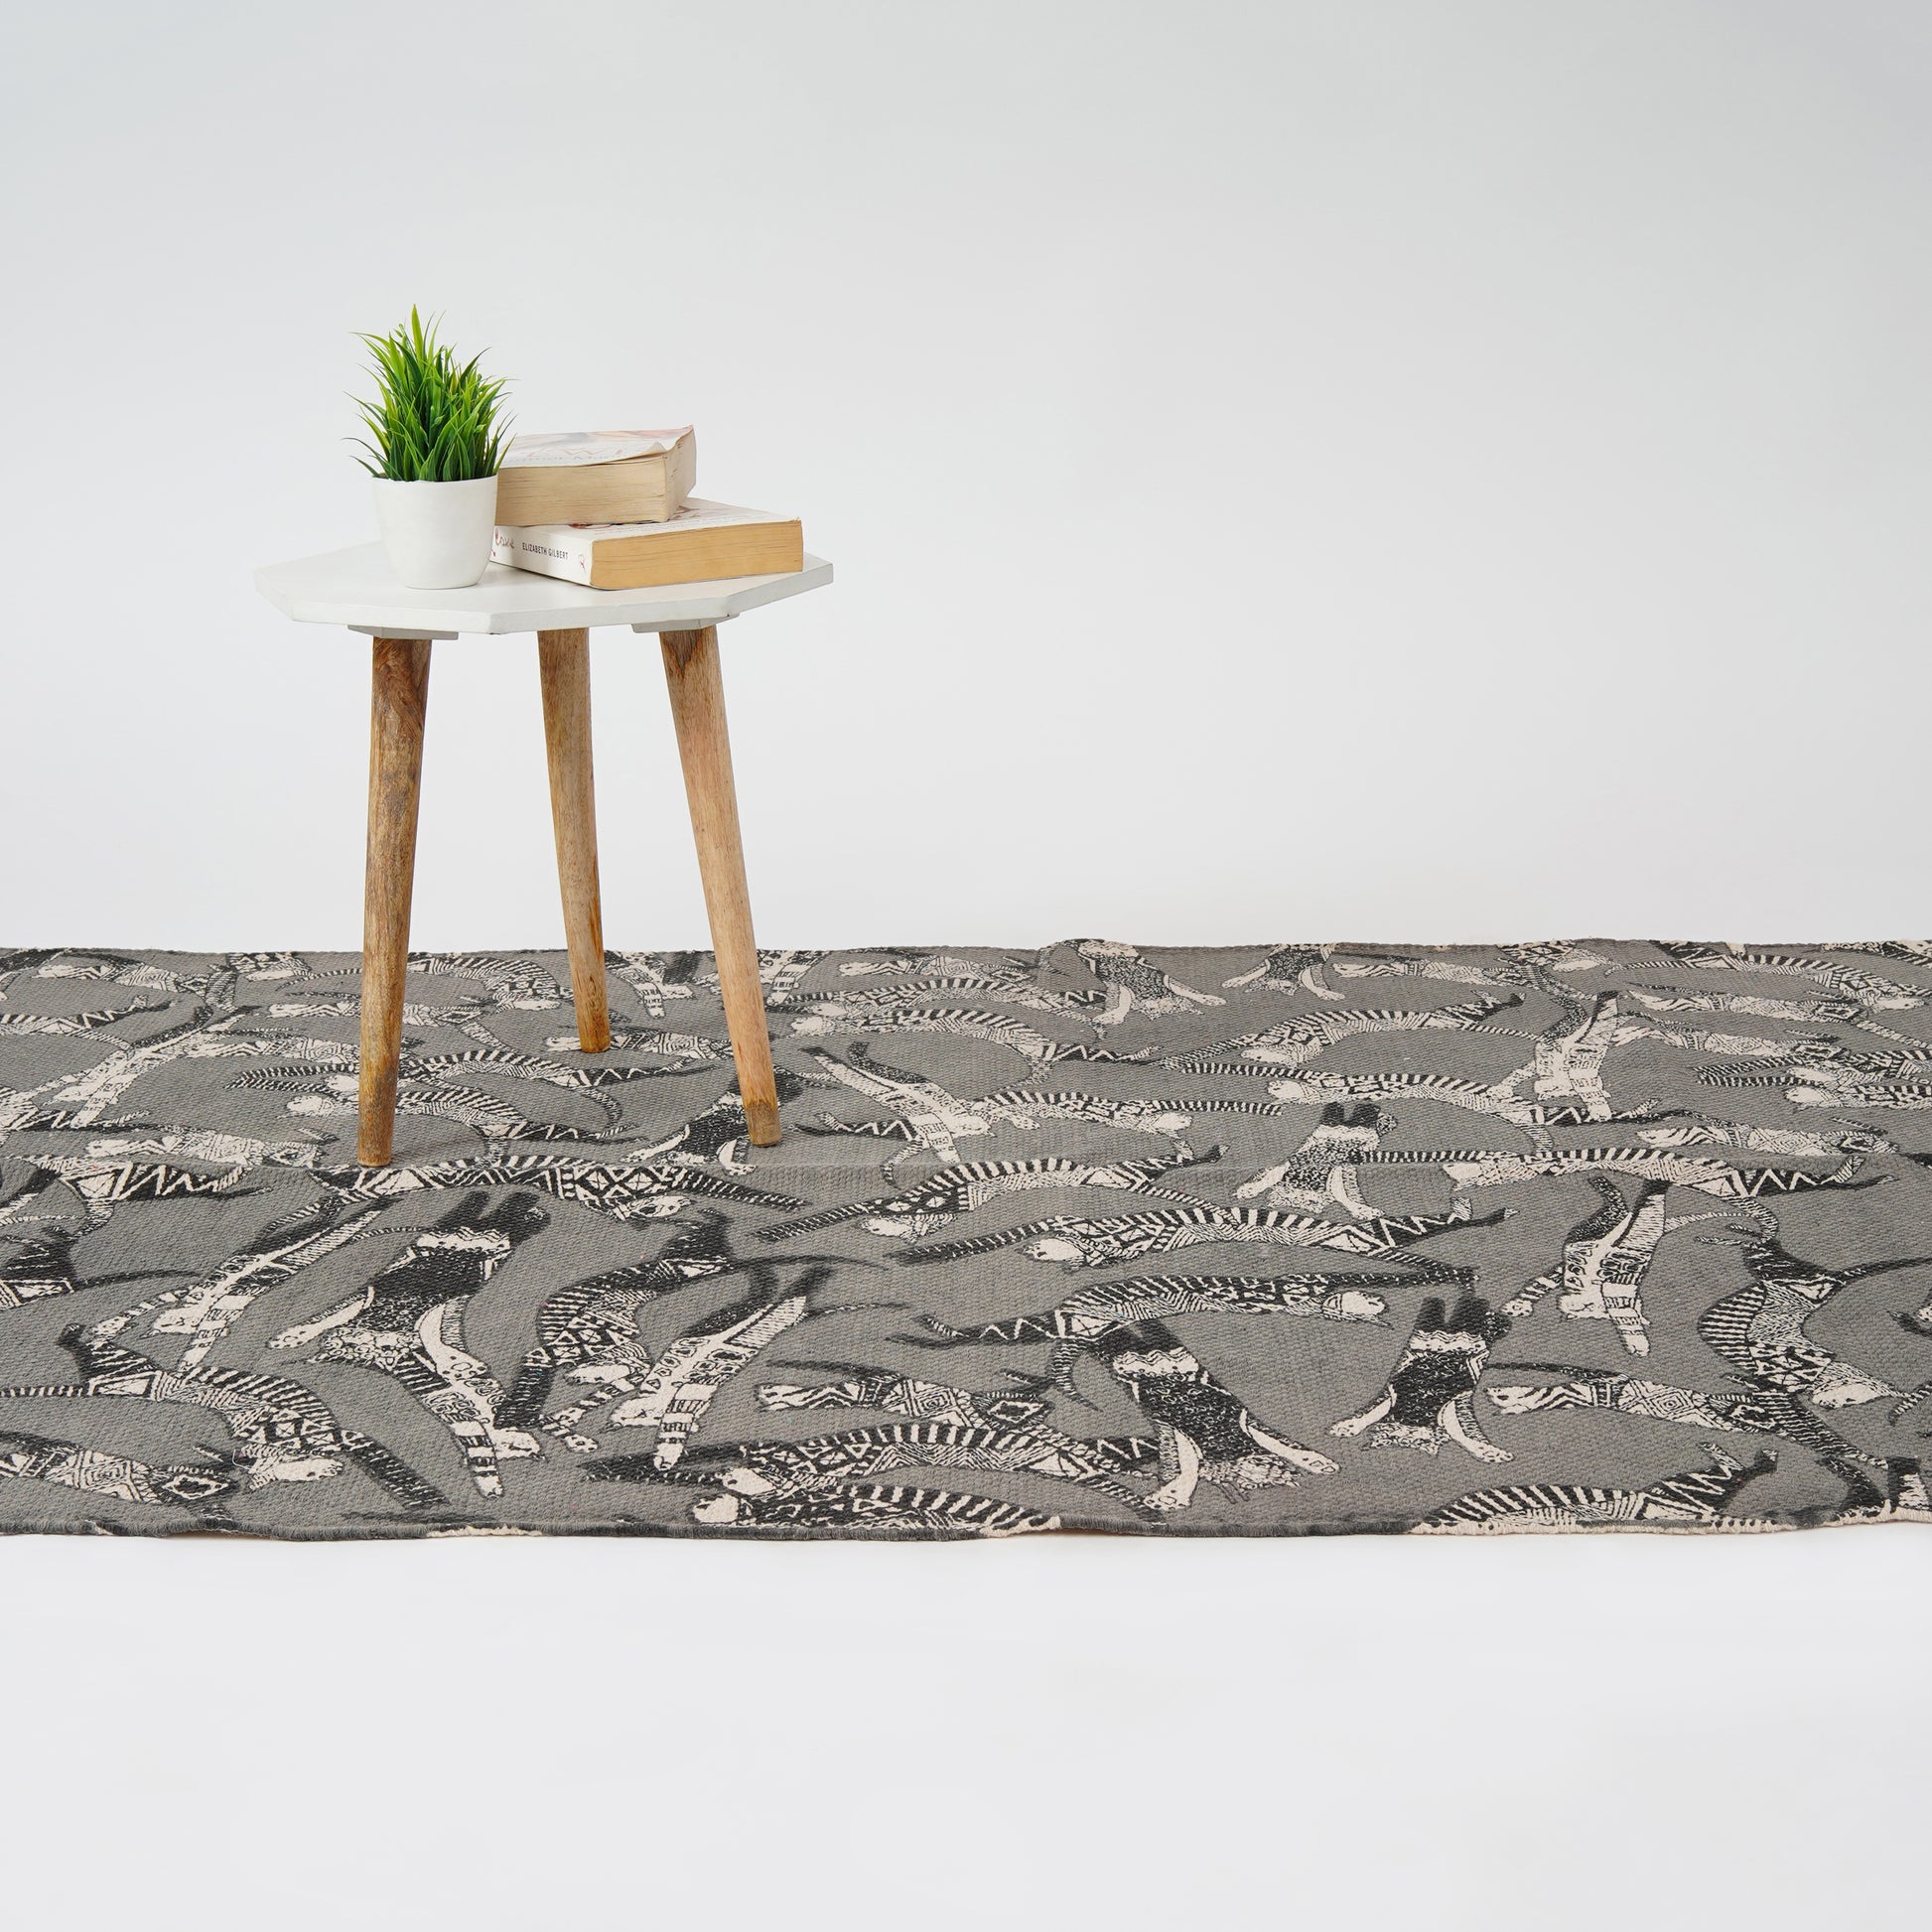 3 x 5 ft Cotton Area Rug Printed -Cat Party Charcoal - The Teal Thread